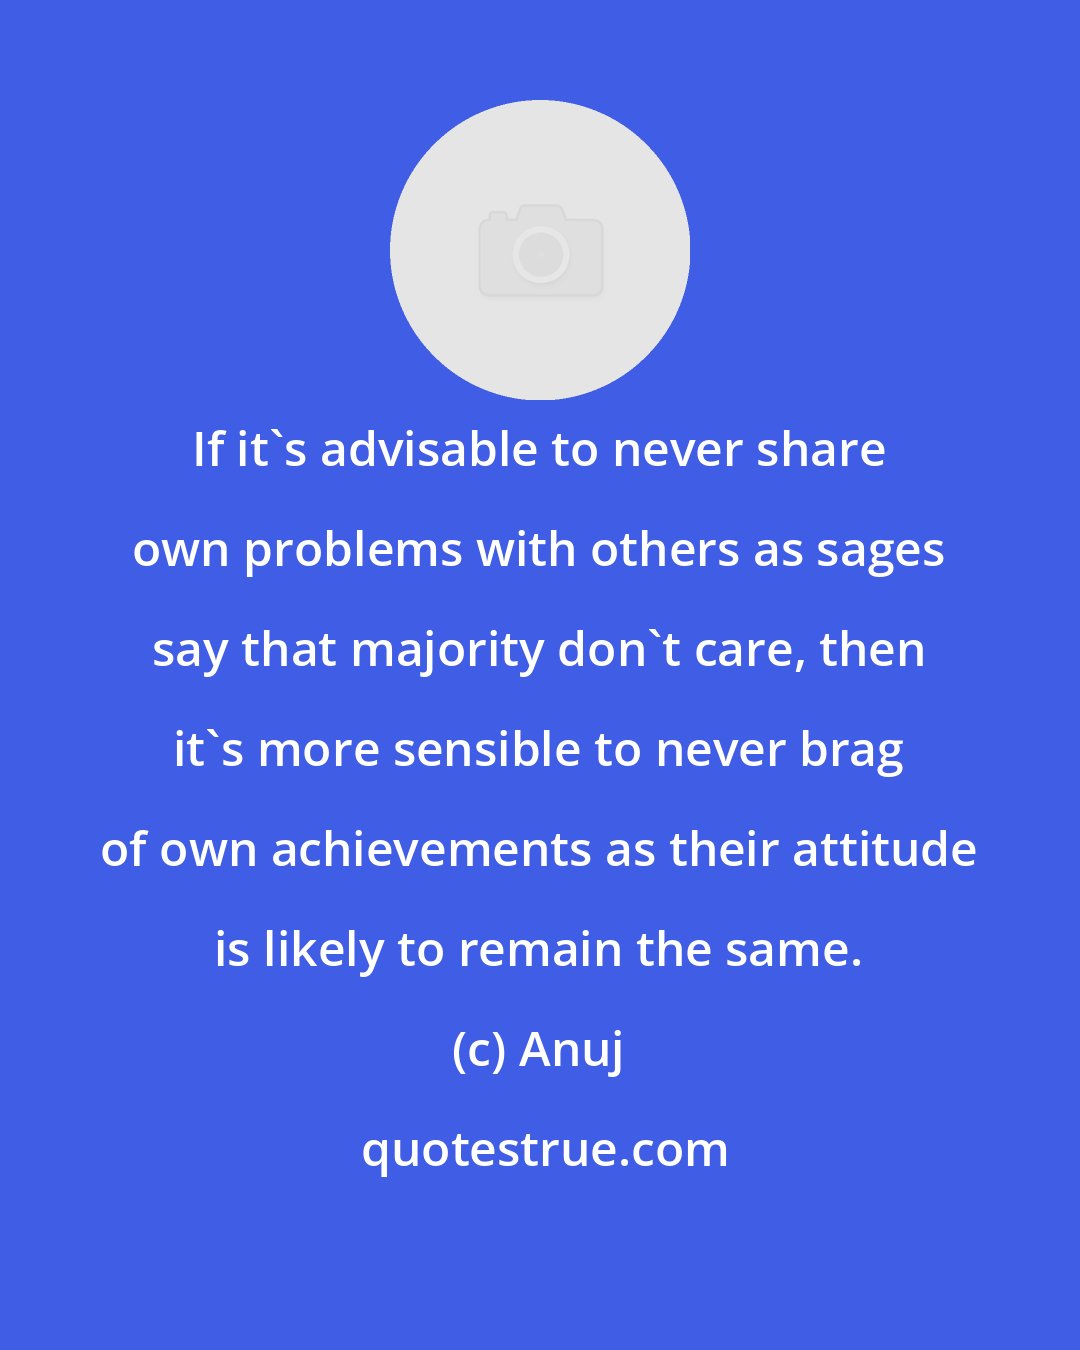 Anuj: If it's advisable to never share own problems with others as sages say that majority don't care, then it's more sensible to never brag of own achievements as their attitude is likely to remain the same.